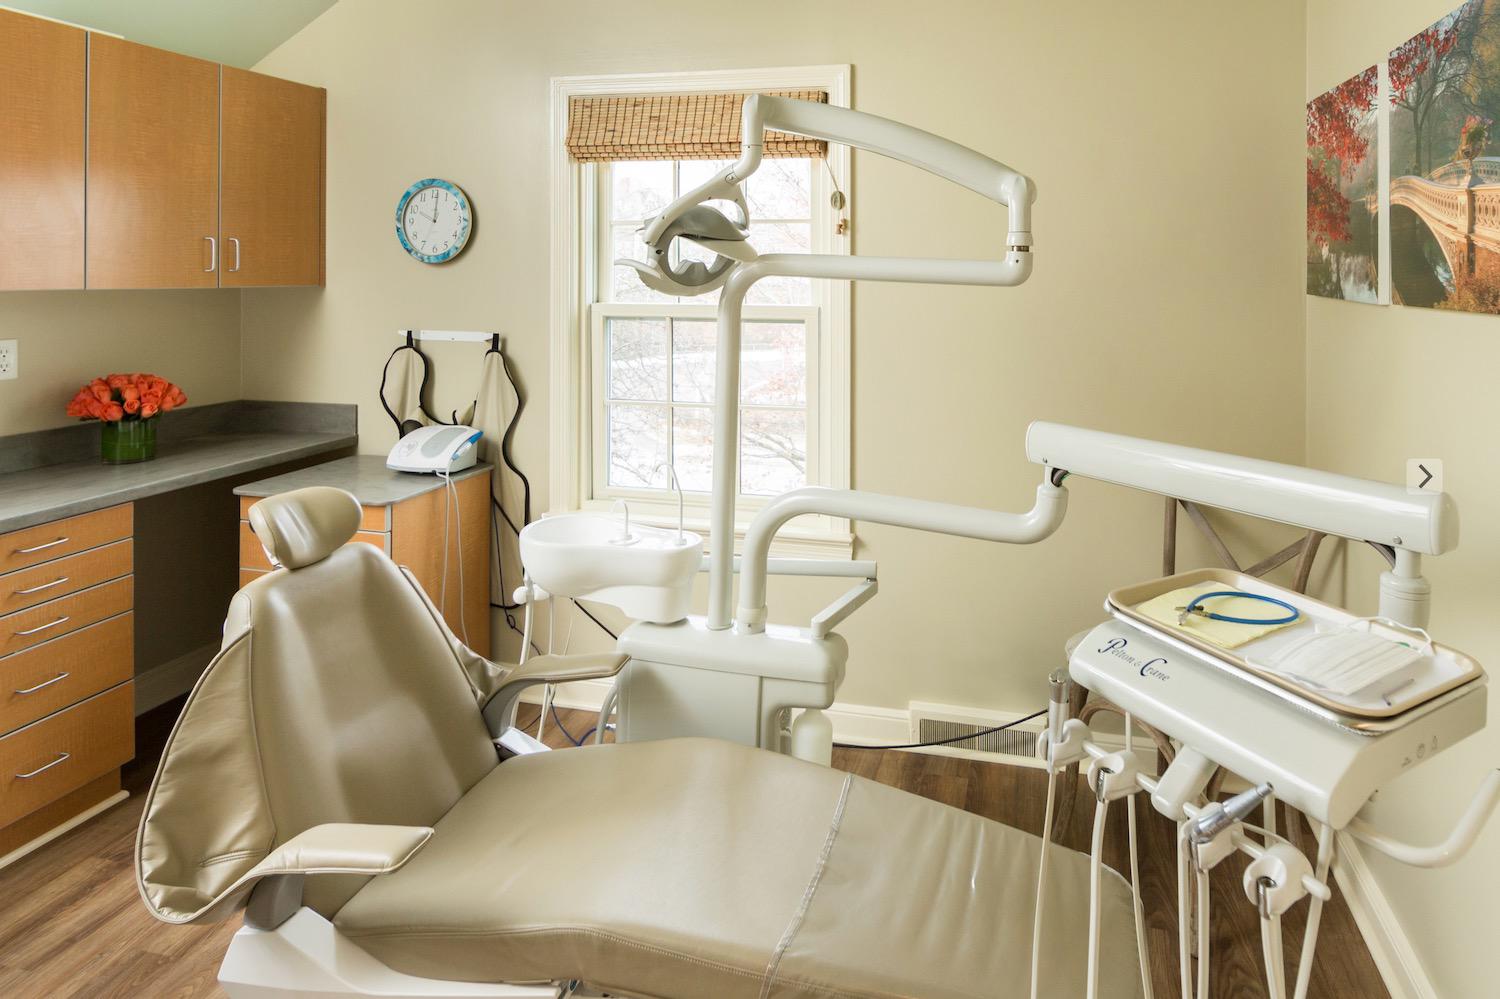 Imperial Dental Associates provides a range of dental services to both adults and children. A true family dental practice located in Westport, Connecticut, you won’t have to find a separate pediatric dentist for your kids. Our location on Imperial Avenue is very convenient to access from many popular retailers, office complexes, and schools. Many of our patients make the short drive over from nearby Norwalk and Fairfield. 

While the practice is open daily during the week and we are open every other Saturday to make it even easier to get the dental care that you need. You won’t need to miss work or take your kids out of school to go to the dentist, which is something that is very important for many of our patients.